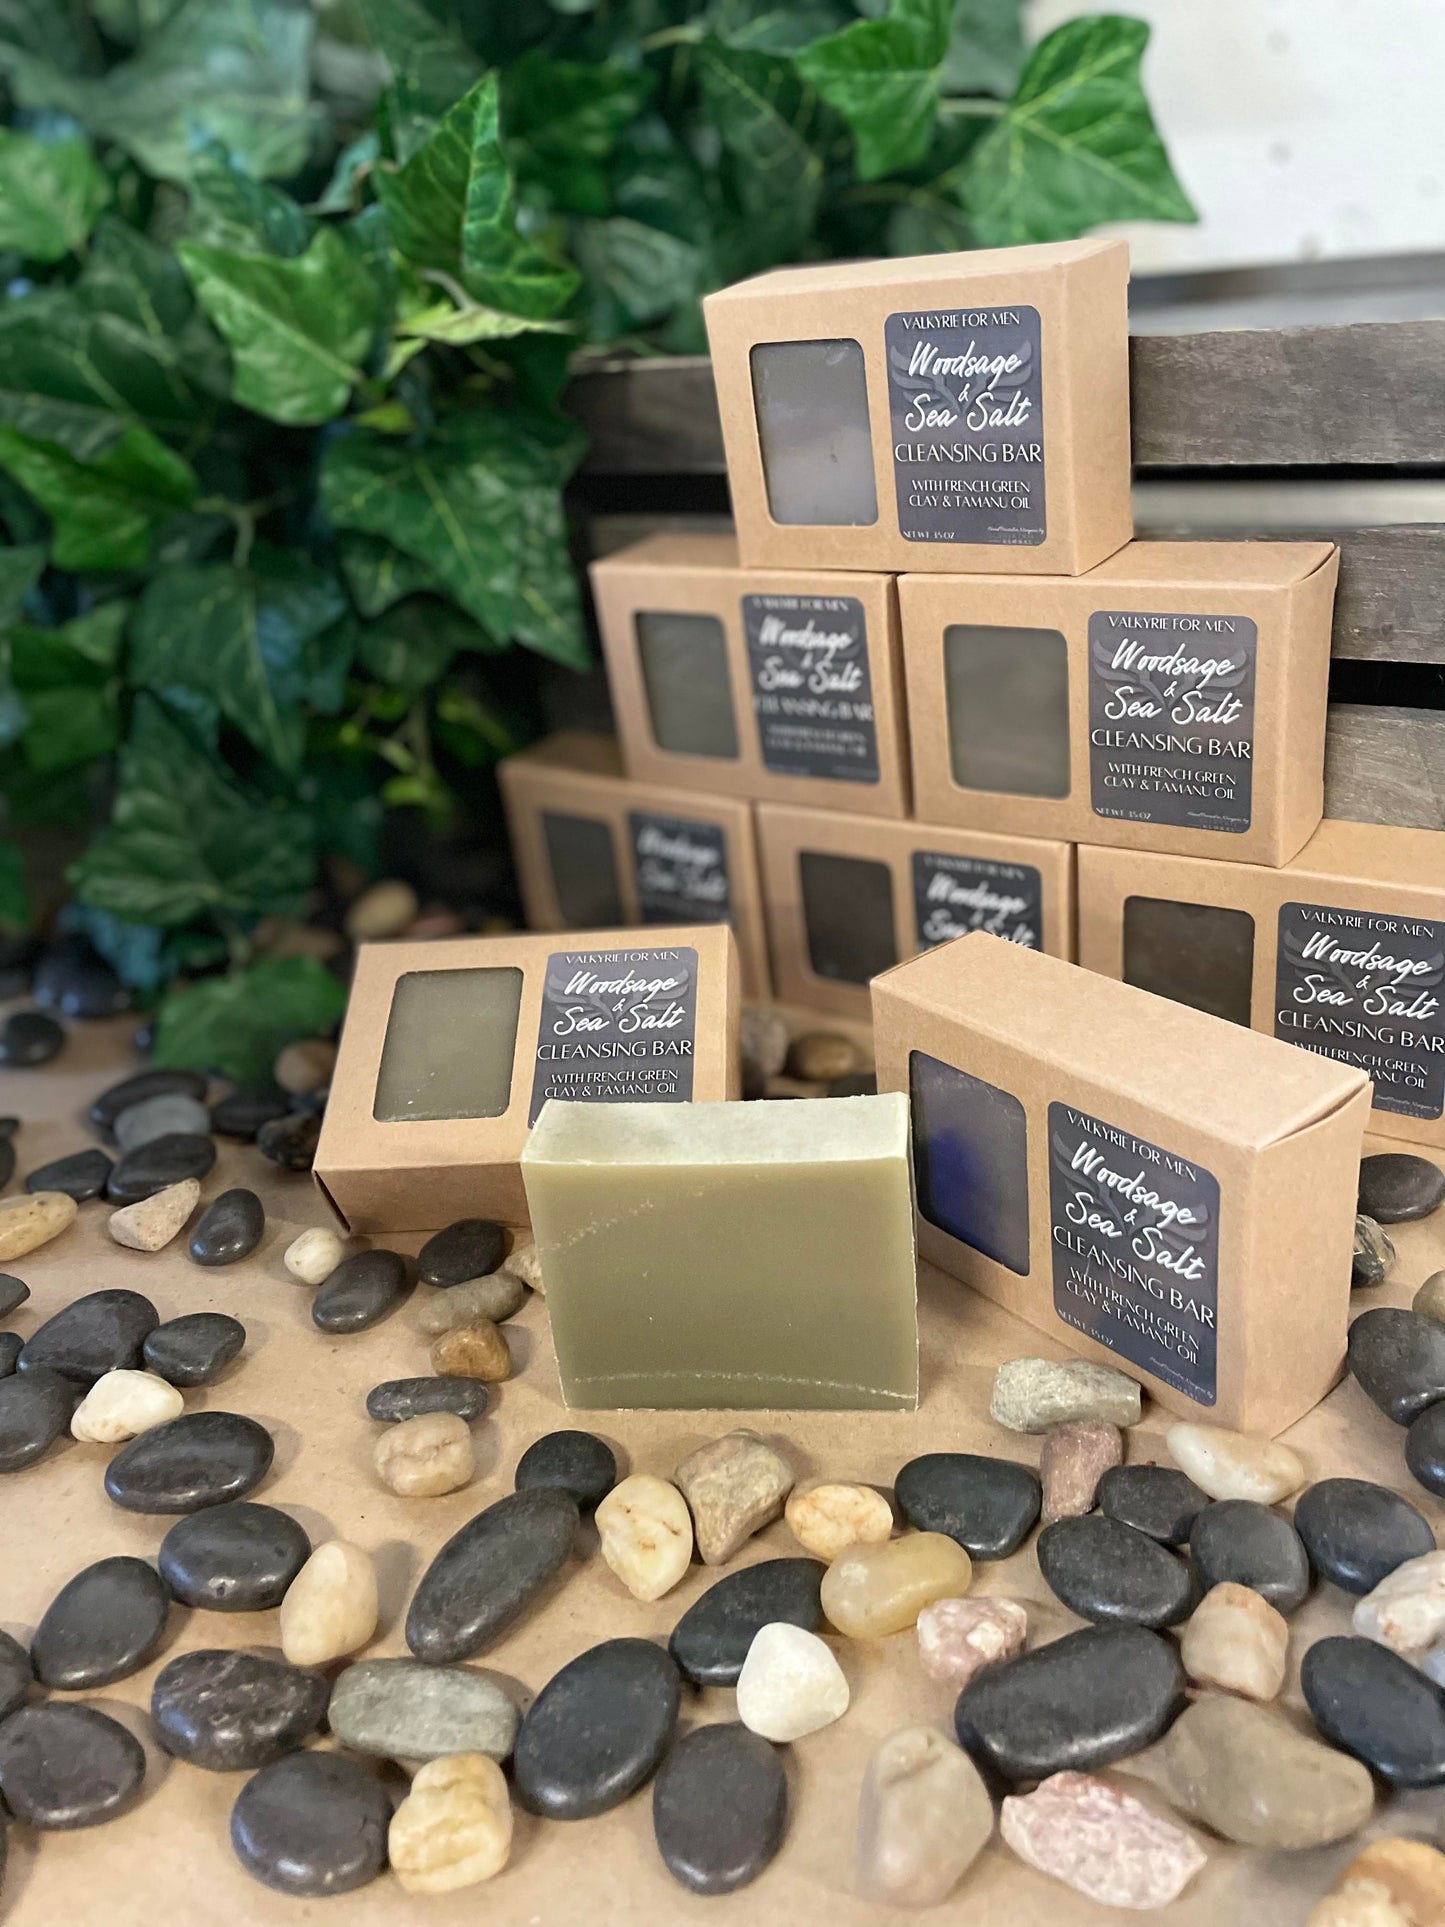 Woodsage & Sea Salt Cleansing Bar Valkyrie For Men Valkyrie Global Natural Skin Care Self Care Beauty St. Catharines Ontario Canada